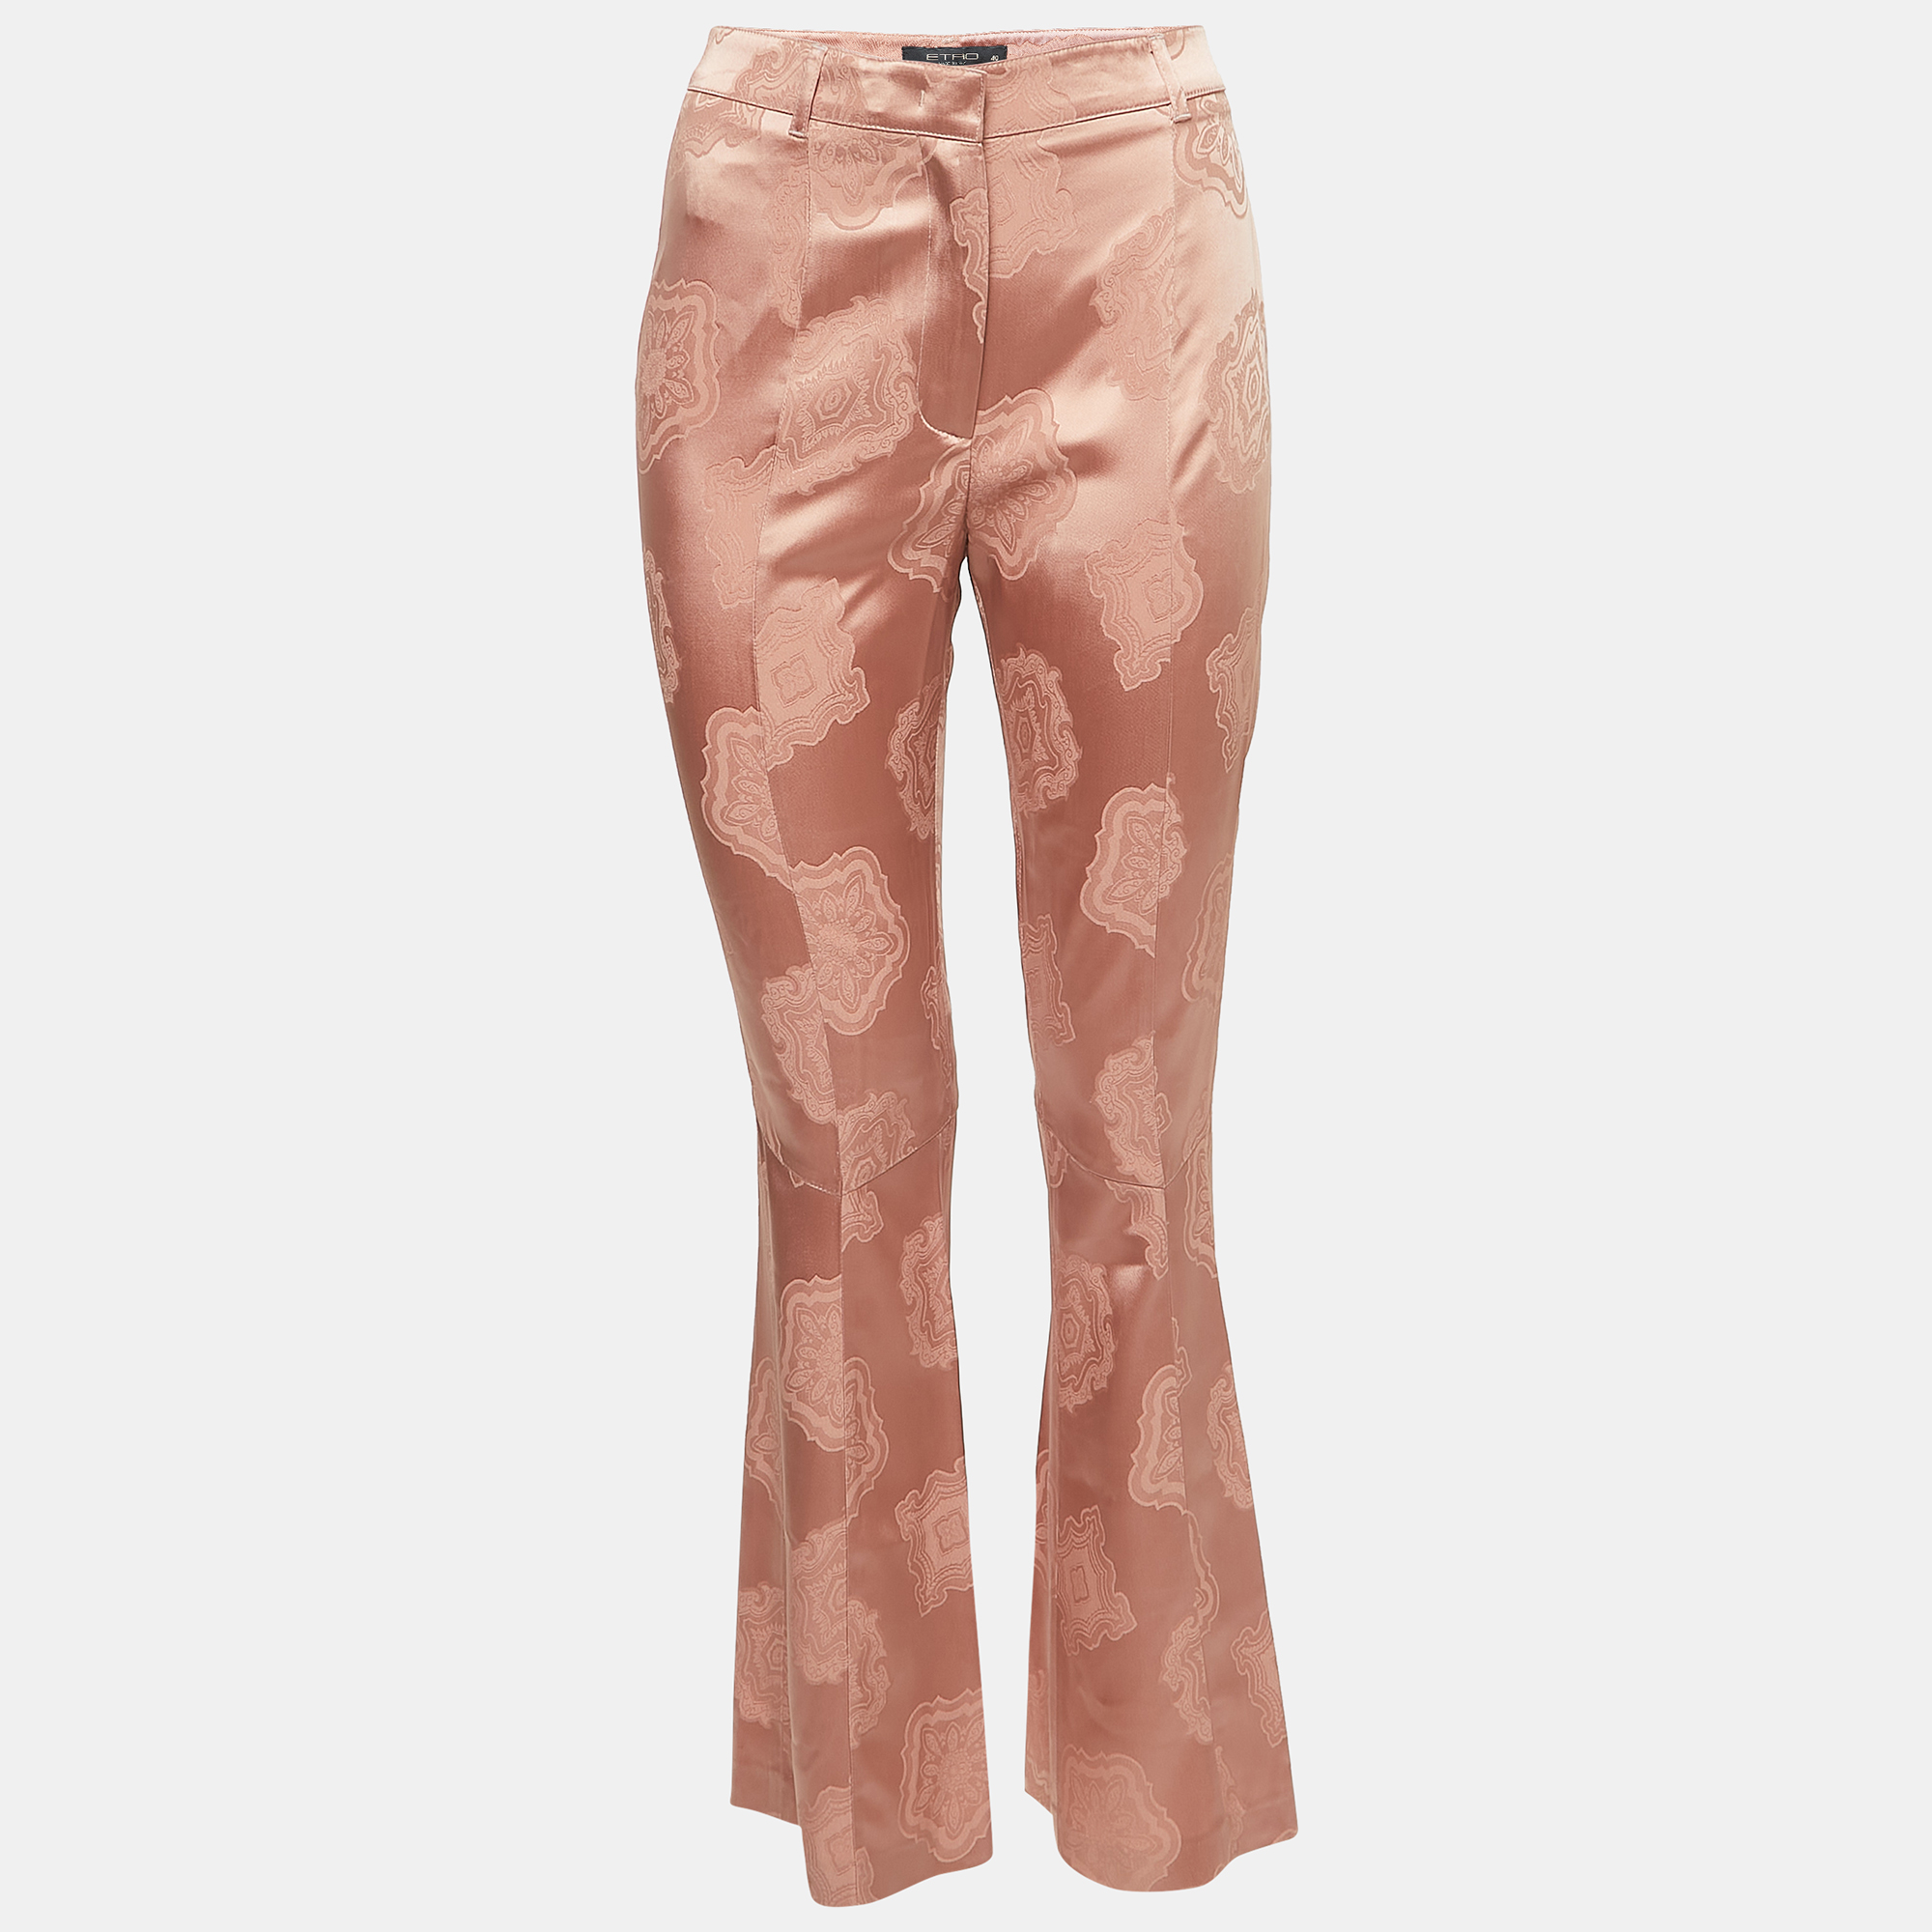 Etro Dusty Pink Patterned Crepe Flared Trousers S